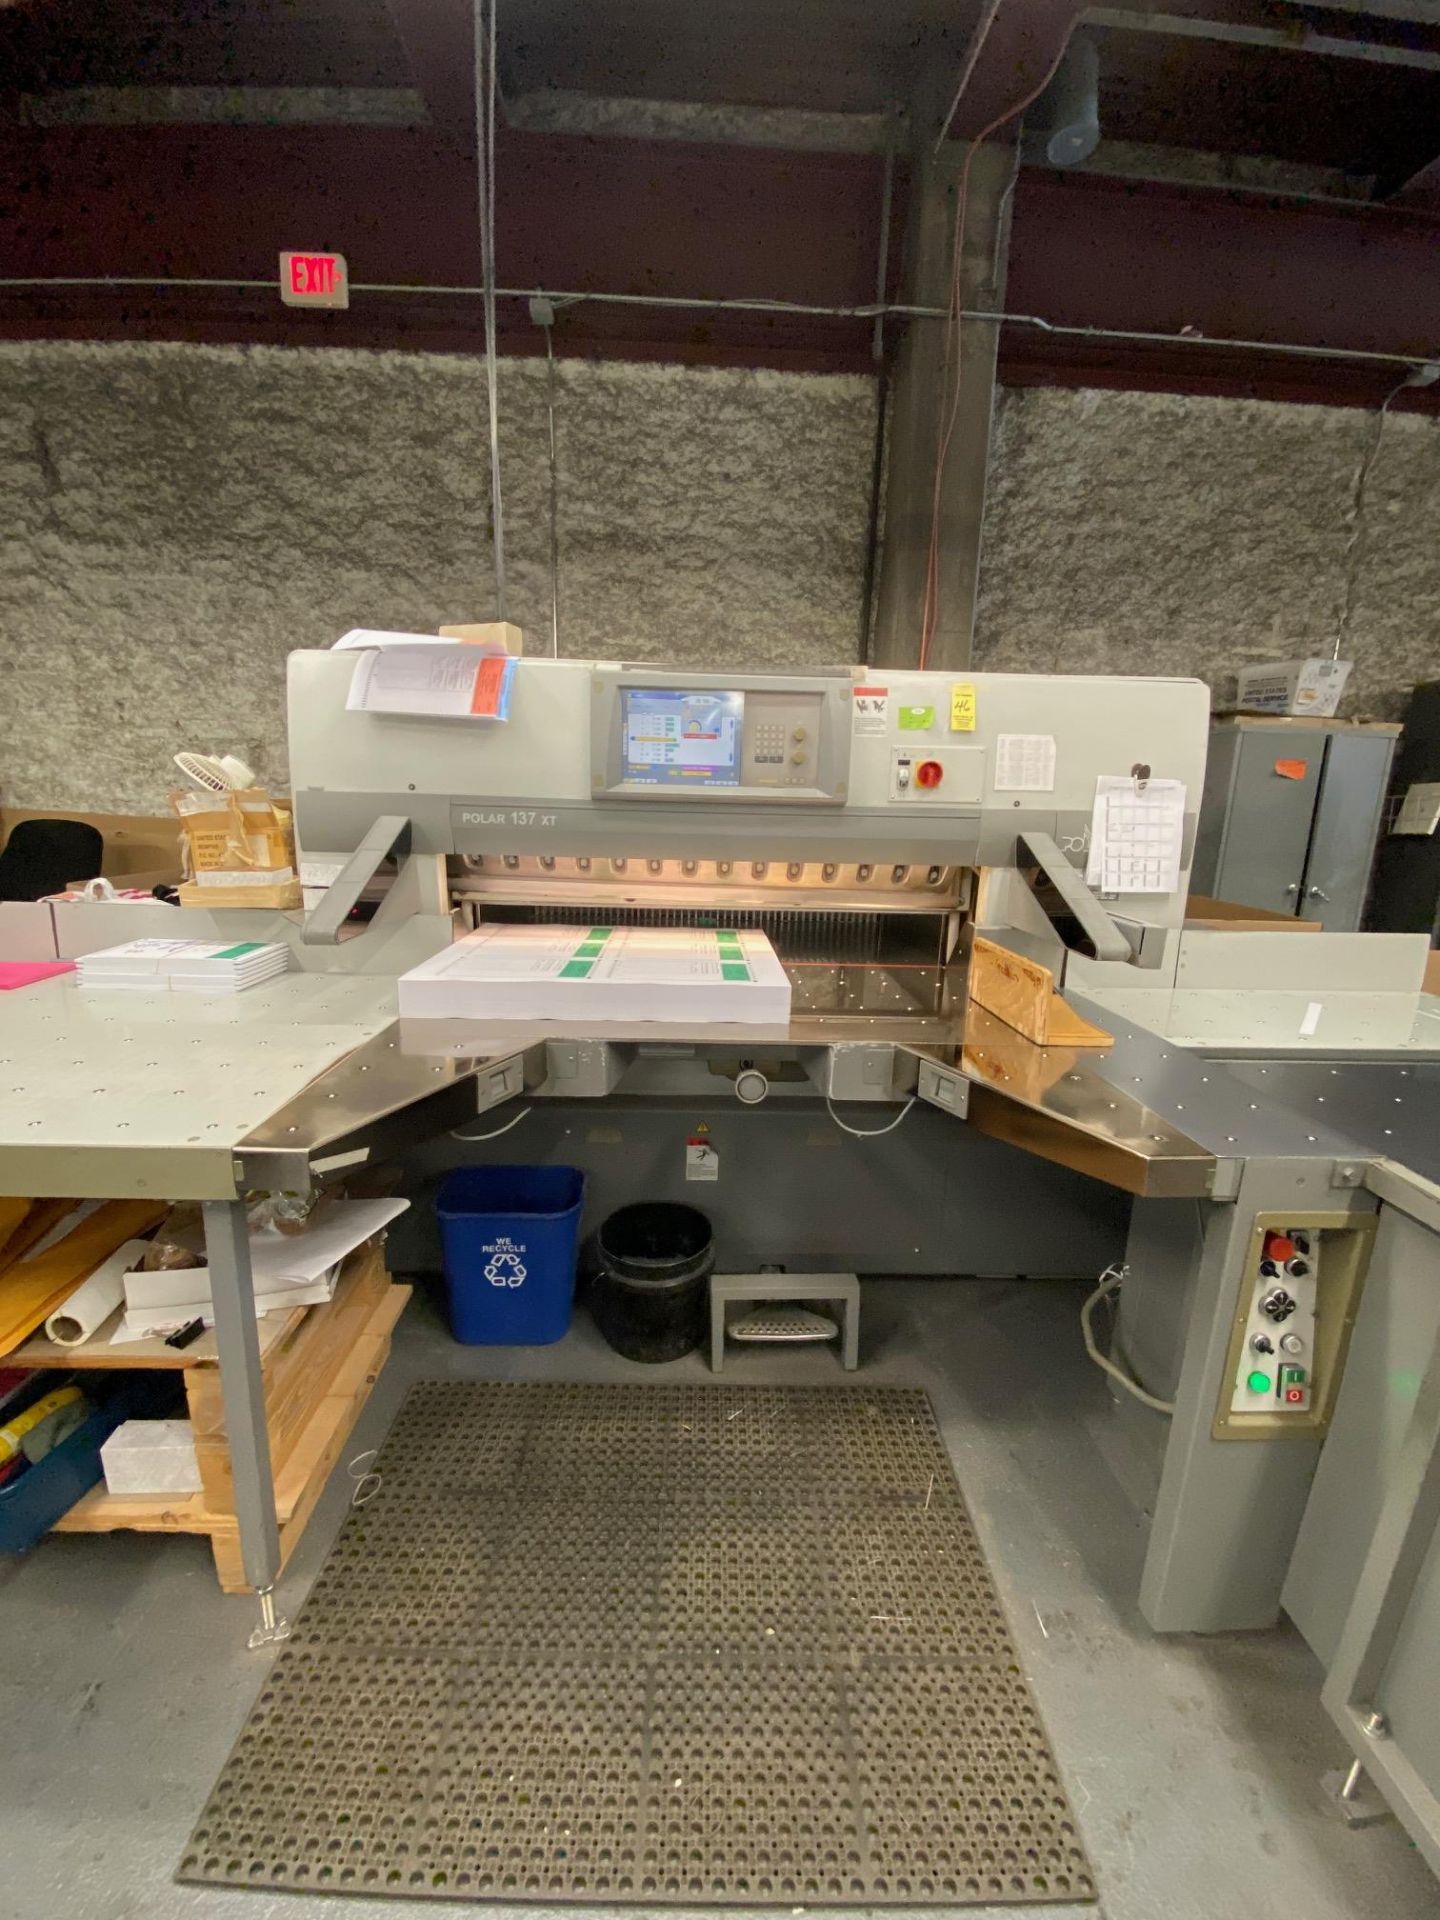 2004 Polar 137XT 54" Paper Cutter, s/n 7441210, w/Complete Workflow Including 2002 - Image 4 of 9